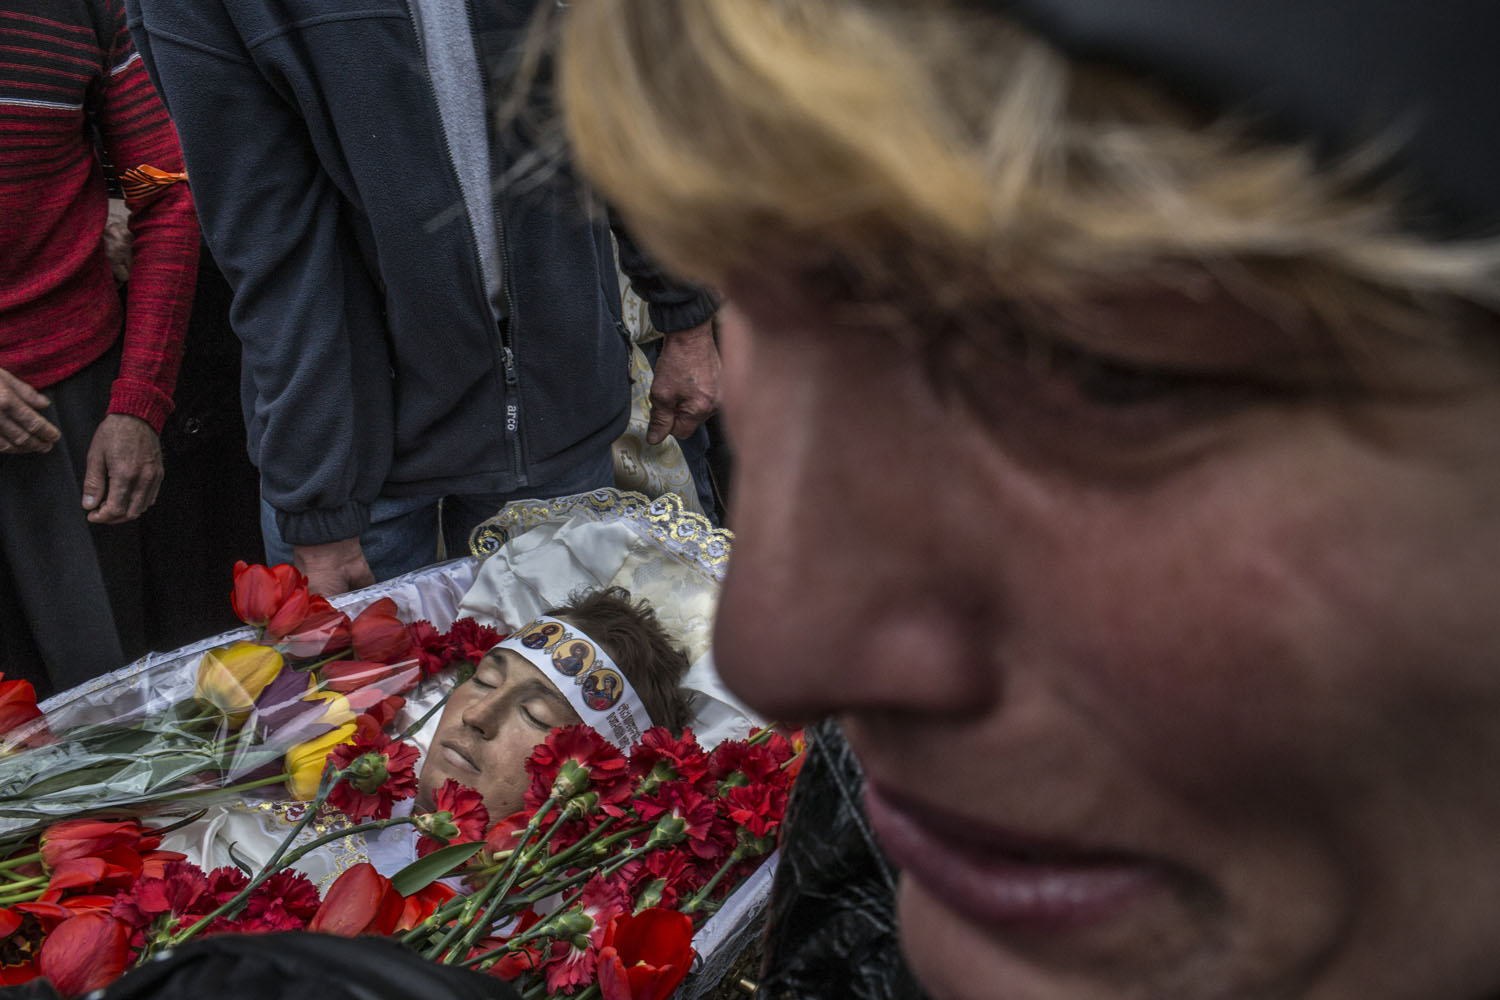 A woman mourns as one of the bodies of three men killed in a shootout days earlier passes, during the men's funeral outside the Orthodox Church of the Holy Spirit in Slovyansk.